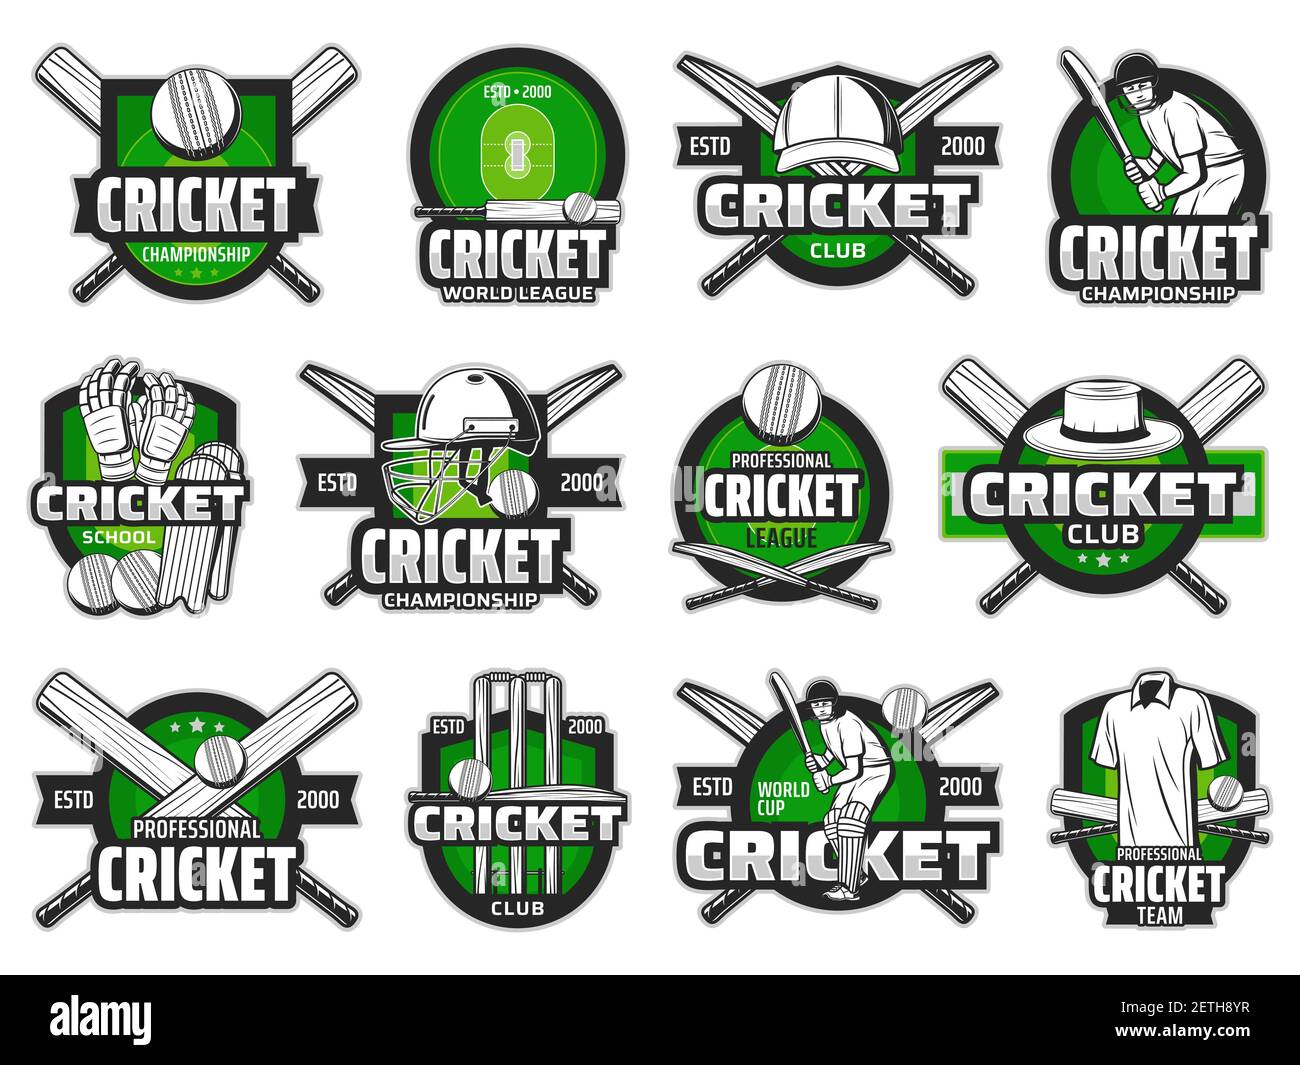 Cricket sport ball, bat and team player vector icons. Cricket field game isolated badges of wickets, batsman gloves, helmets and leg pads, hat, jersey Stock Vector